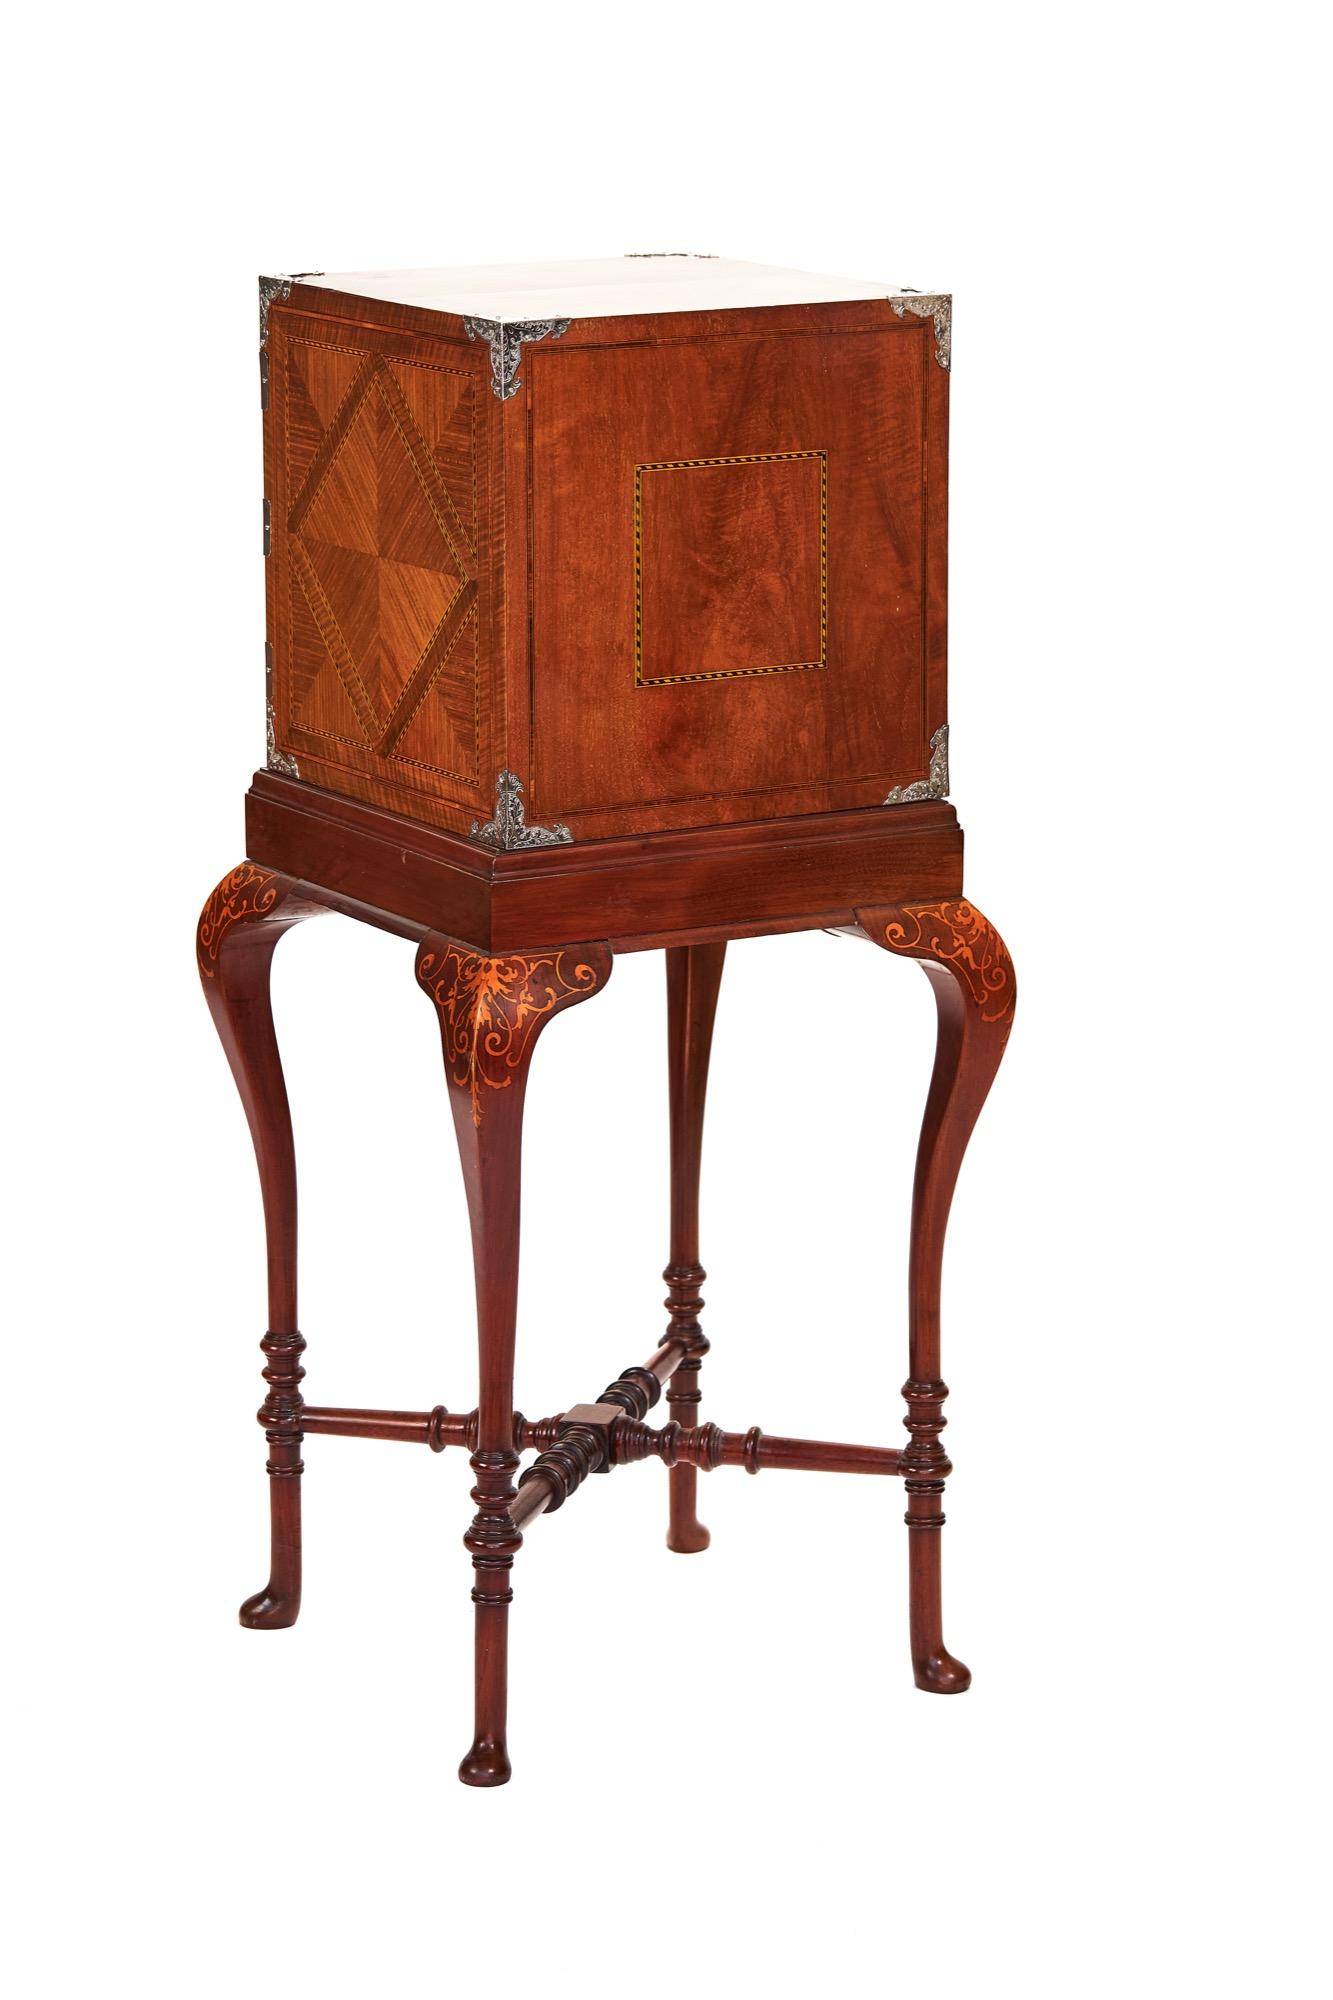 English Fine Gillows, Walnut & Kingwood inlaid fitted drawer cabinet on stand For Sale